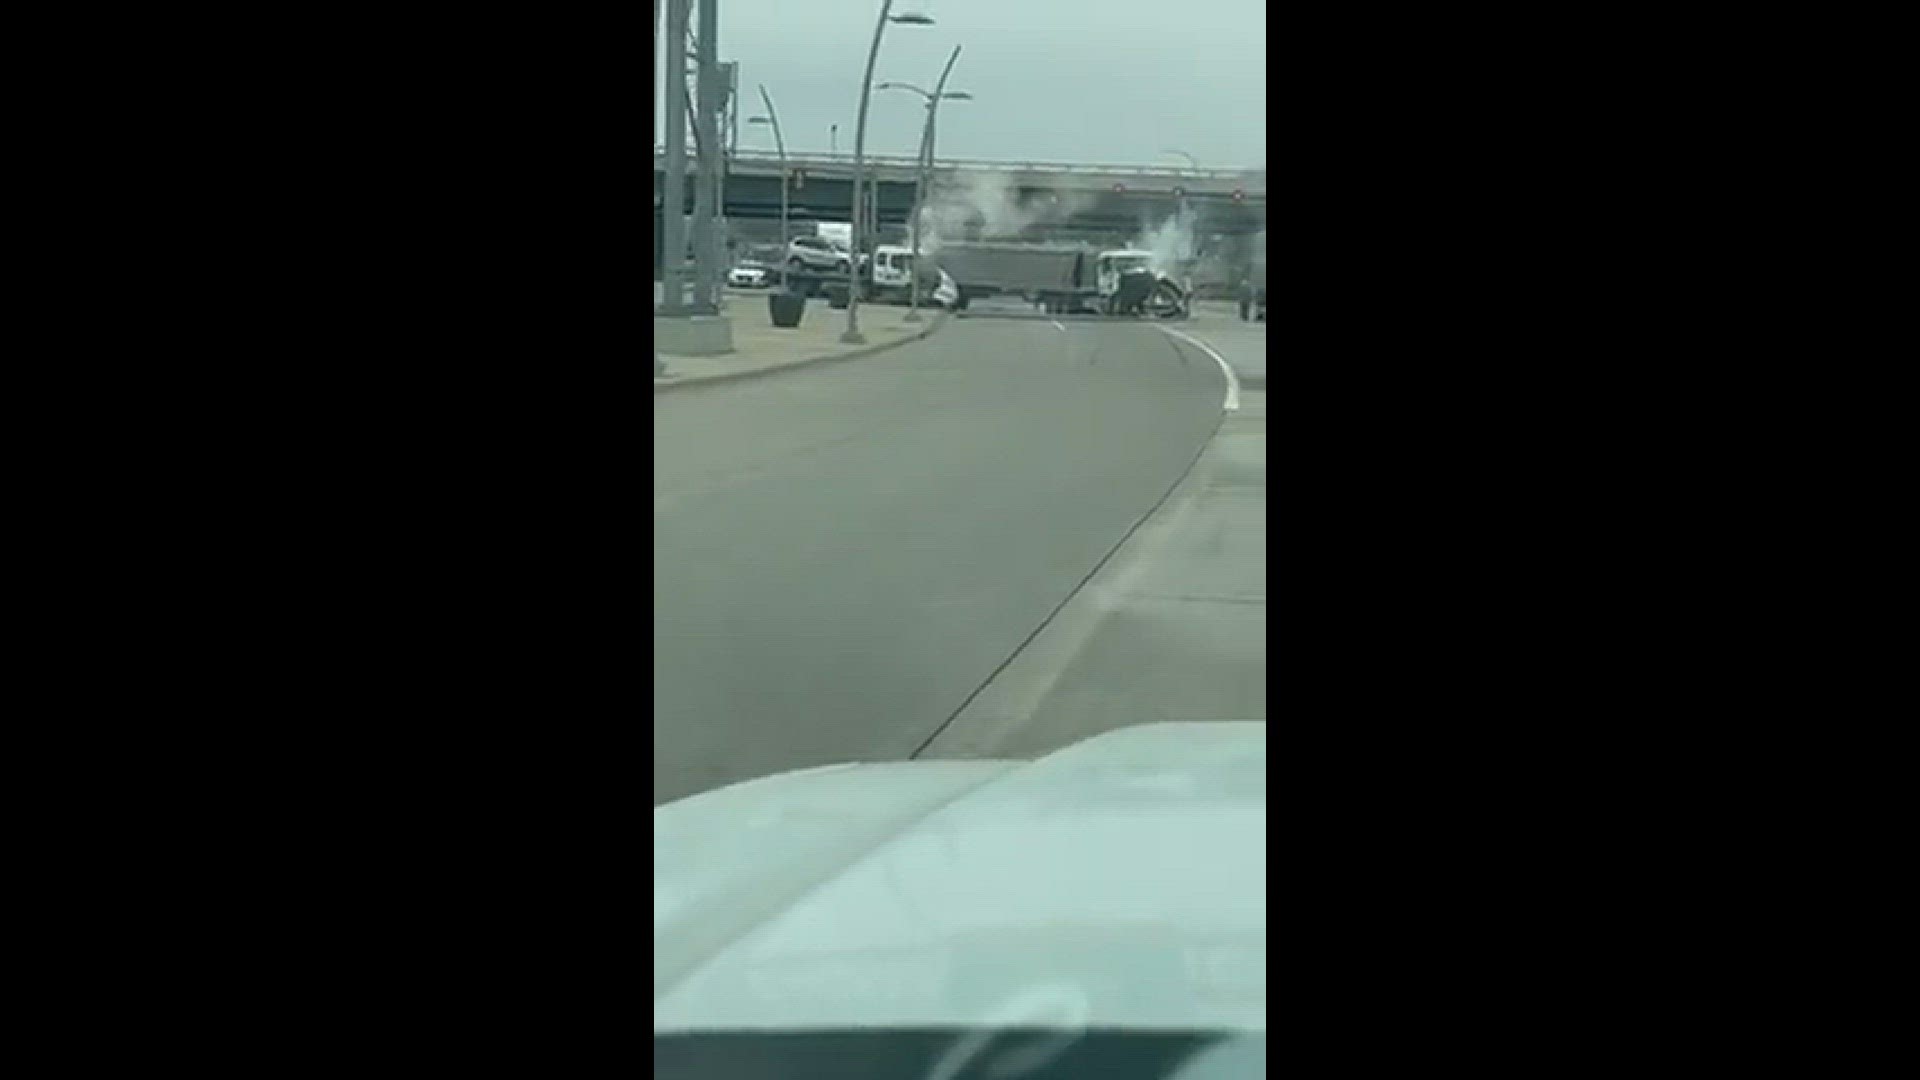 A crash along Grant Street in Bettendorf stalled traffic. This video from Mike Hannan shows parts of the wreck.
Credit: Mike hannan